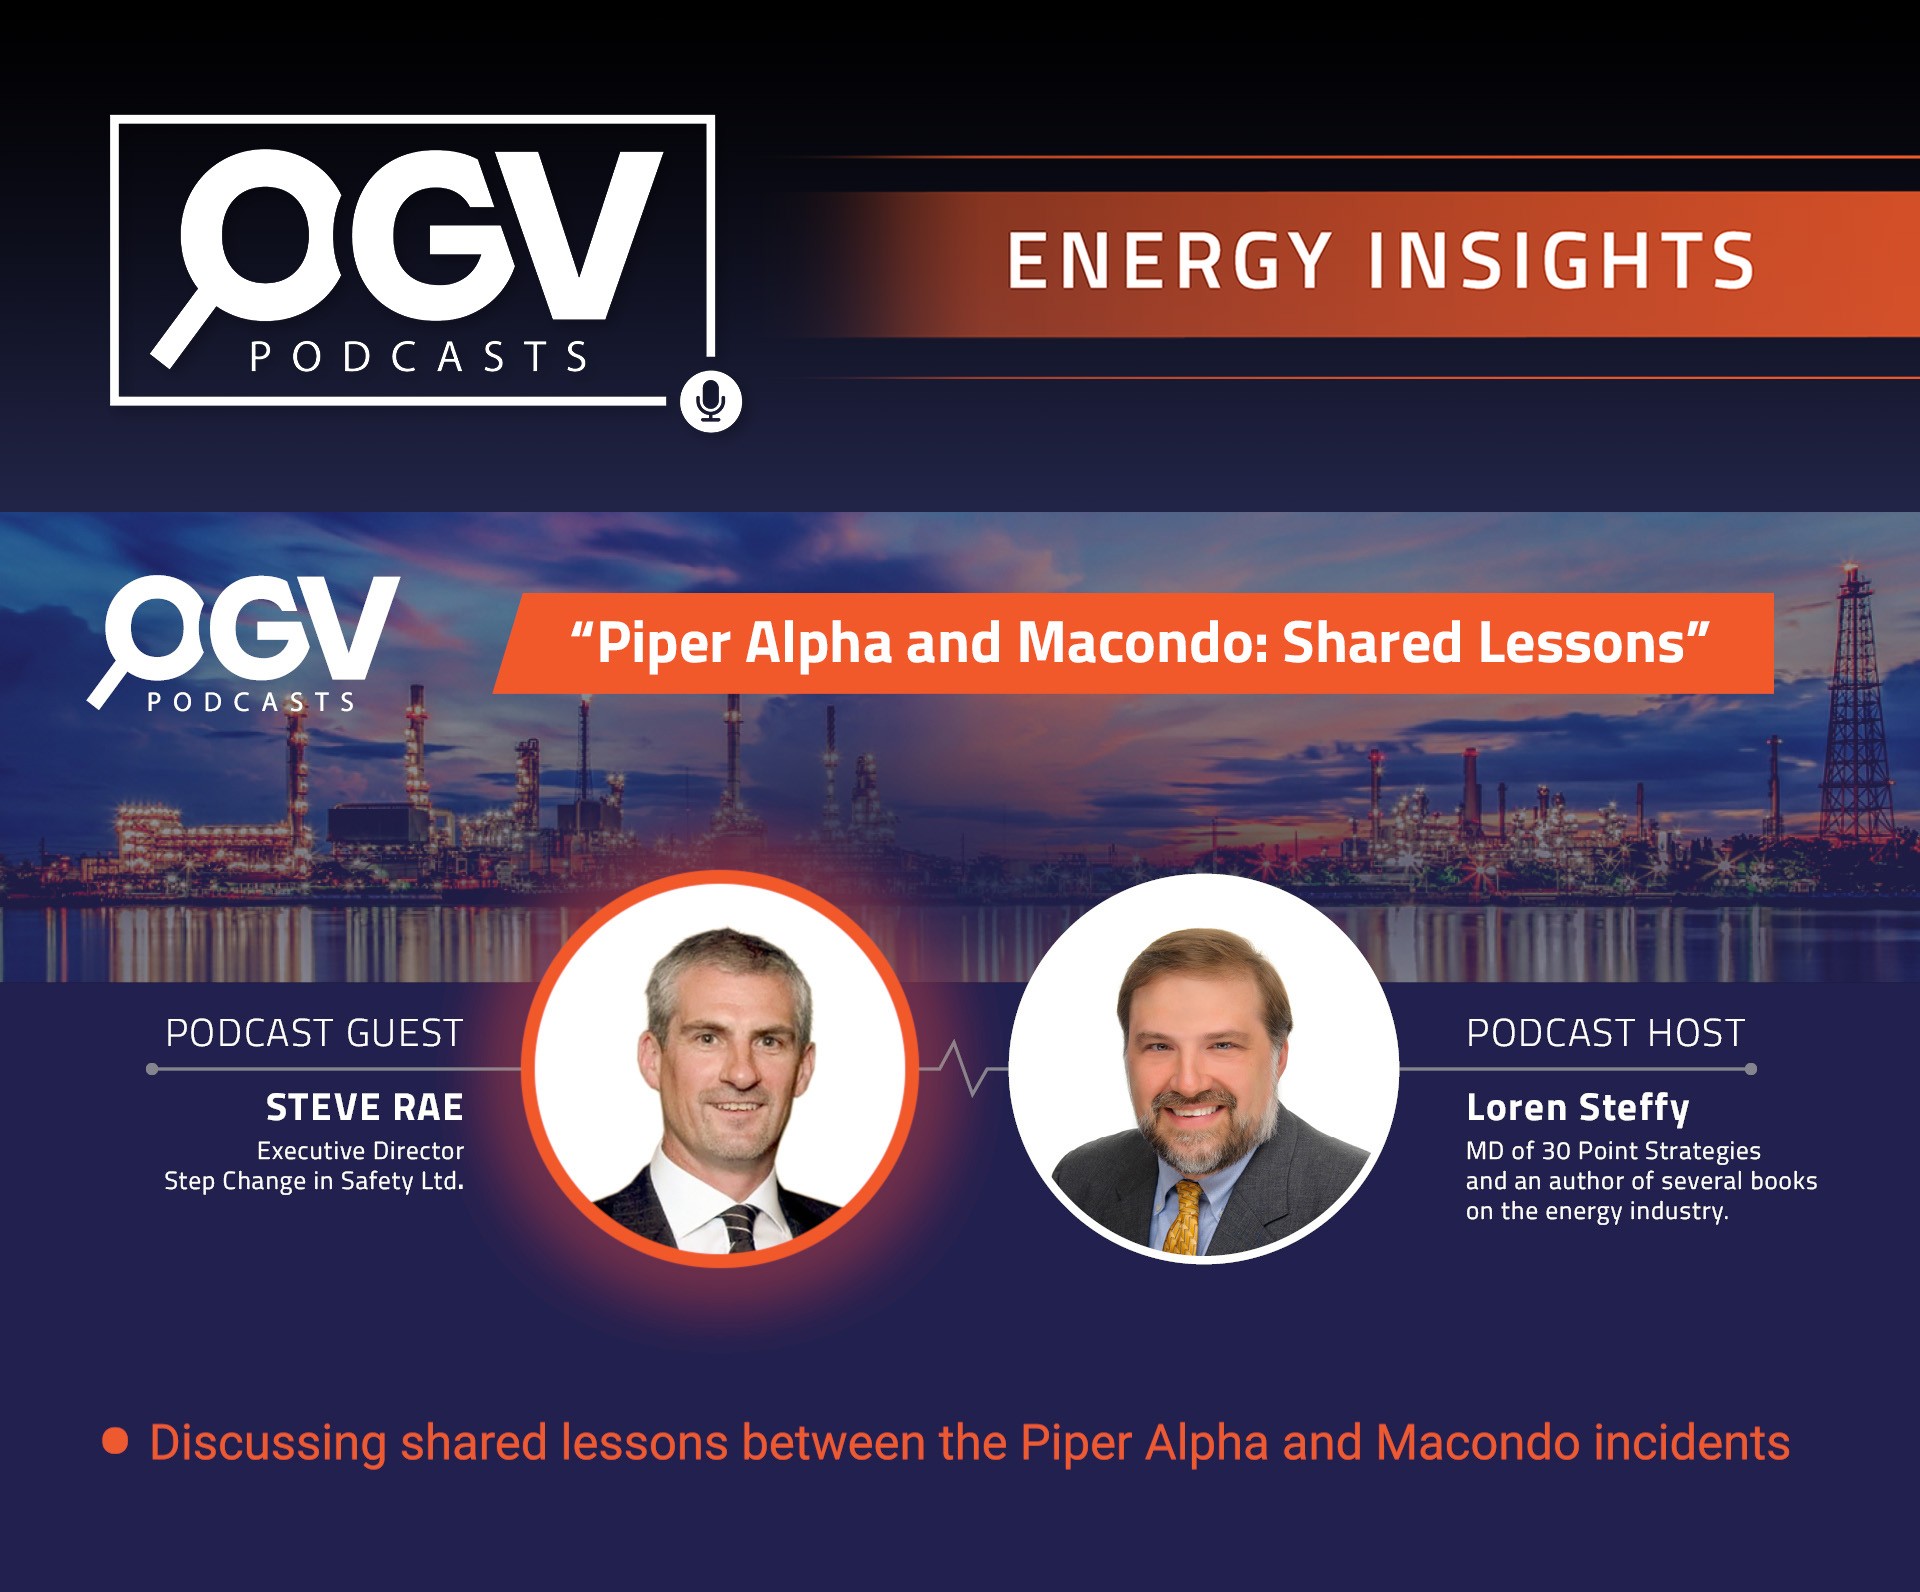 "Piper Alpha and Macondo' Deepwater Horizon: Shared Lessons" with Steve Rae, Executive Director of Step Change in Safety